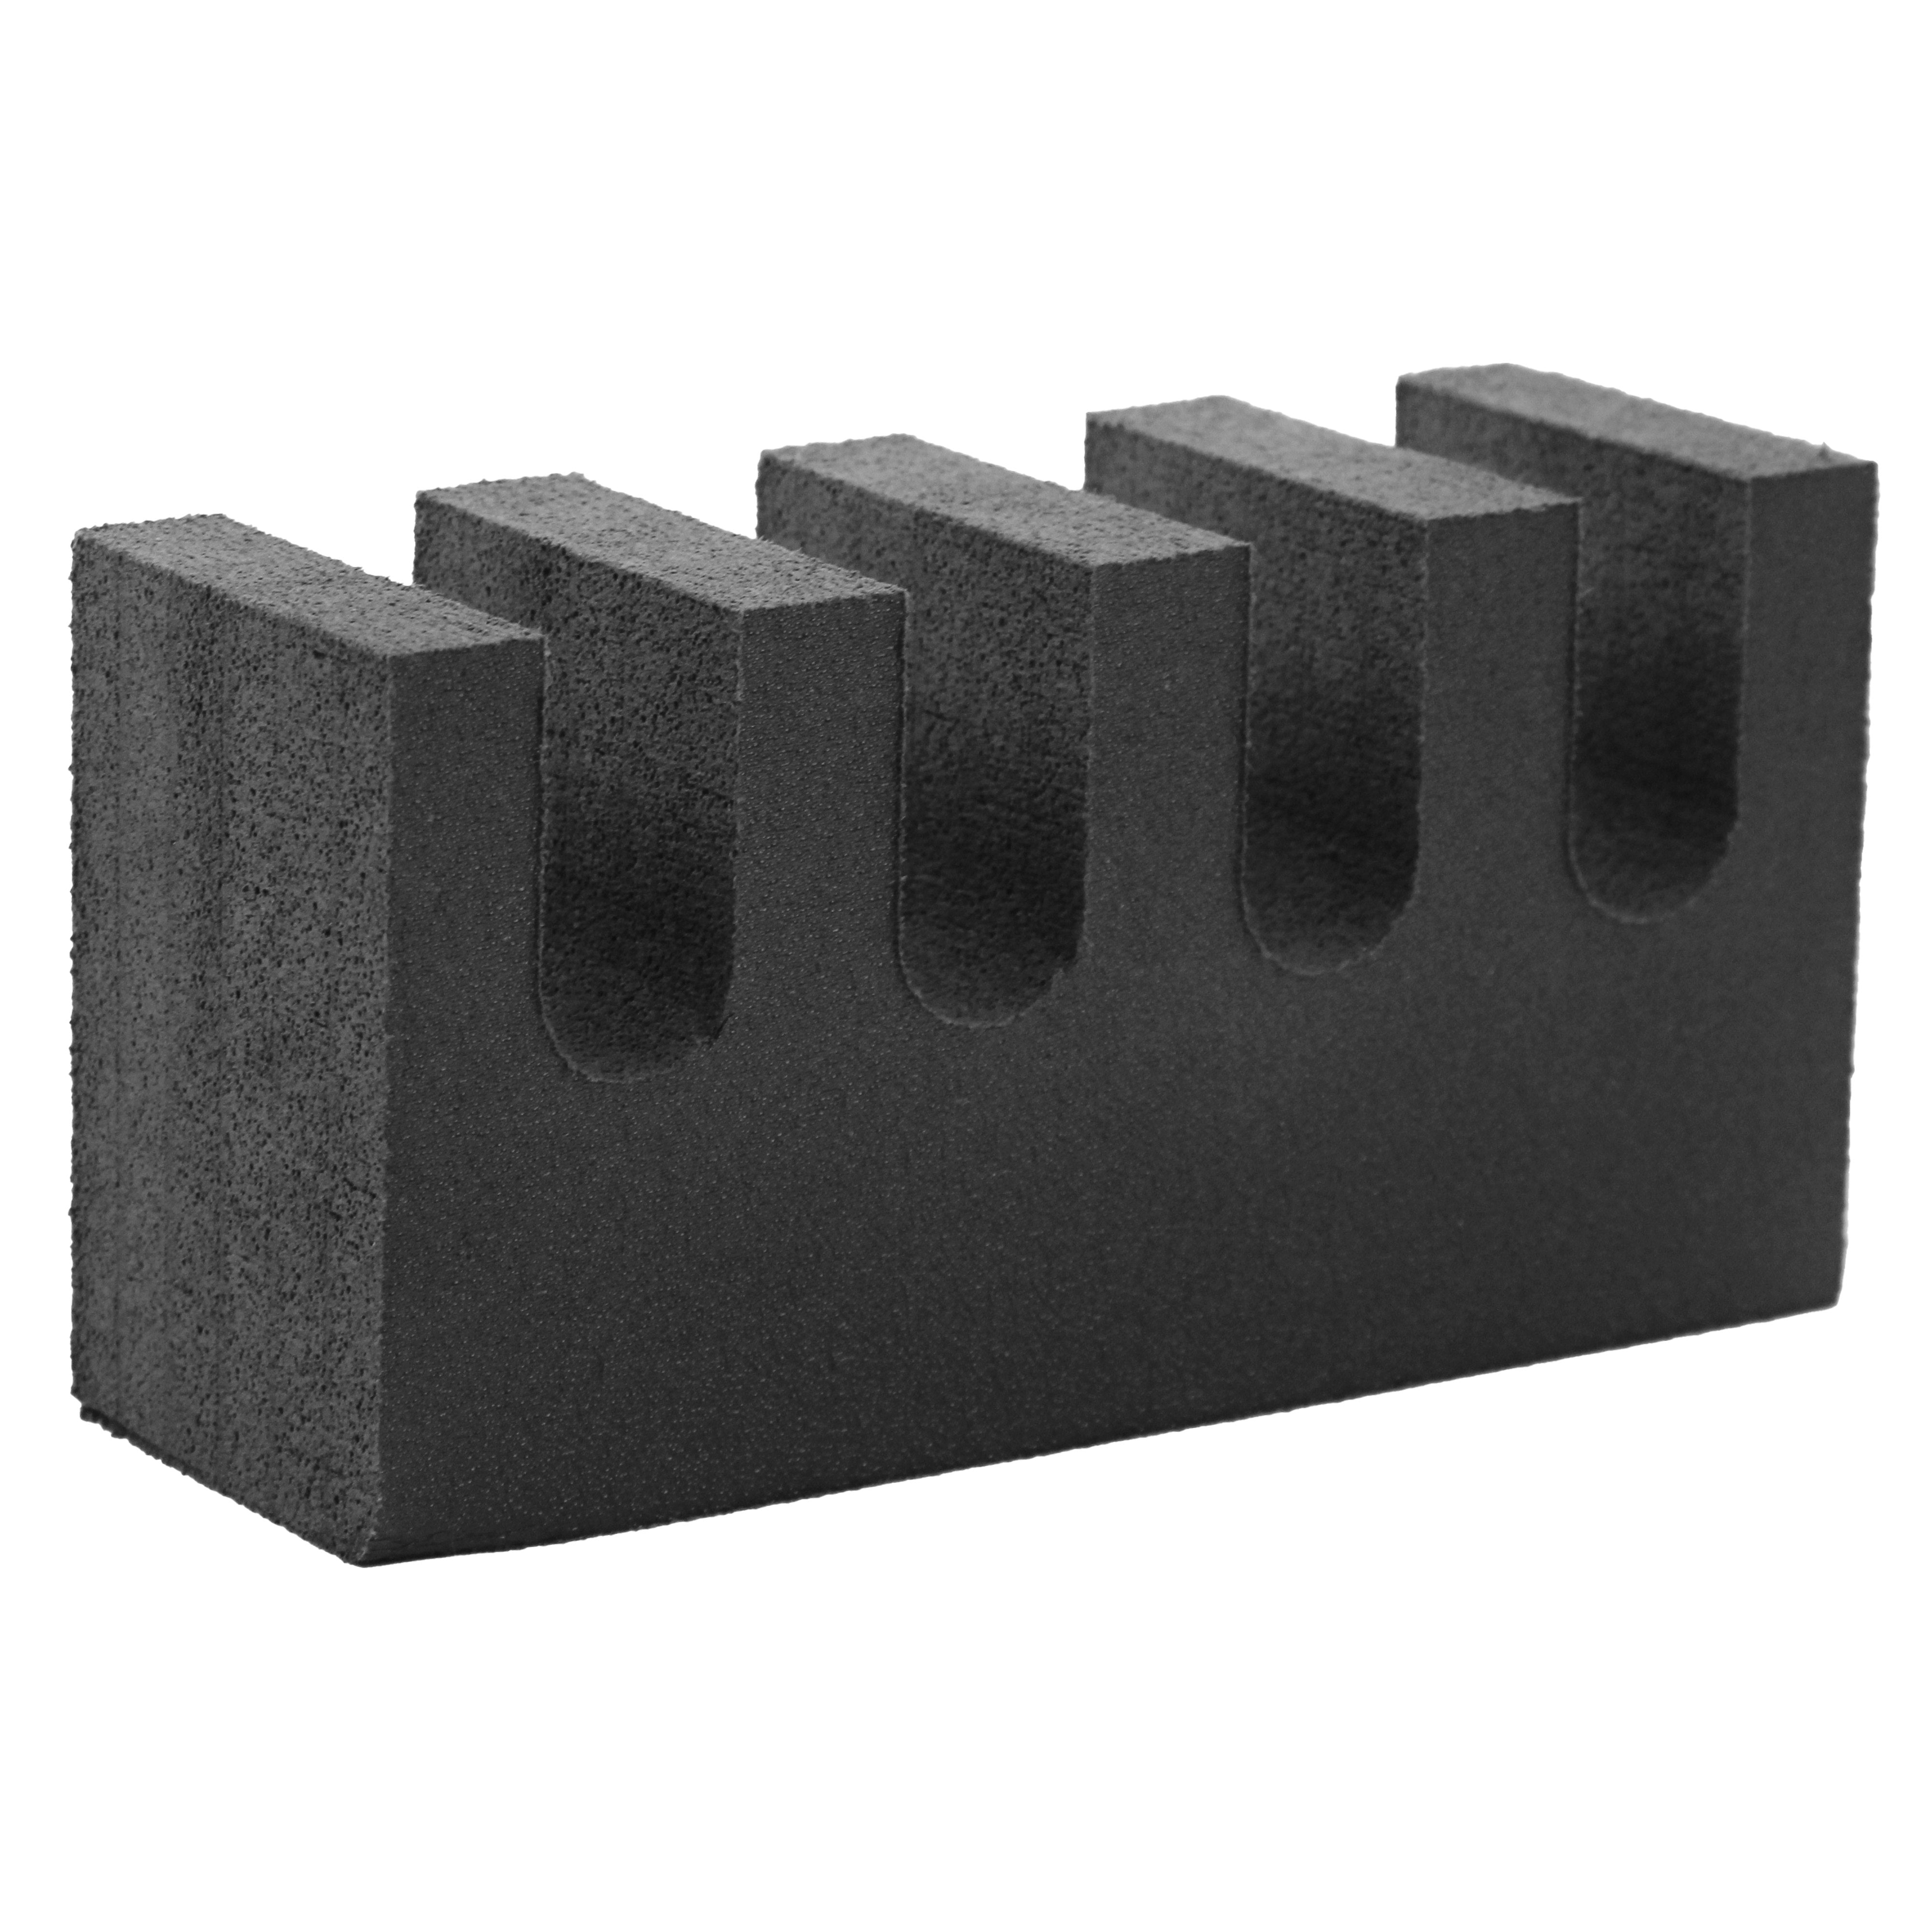 Heavy Duty Foam Dunnage Straight Grooves Reusable Transport Storage Organization Shipping Boxes Crates Containers Warehouses Waterproof 6x3x2 Inches